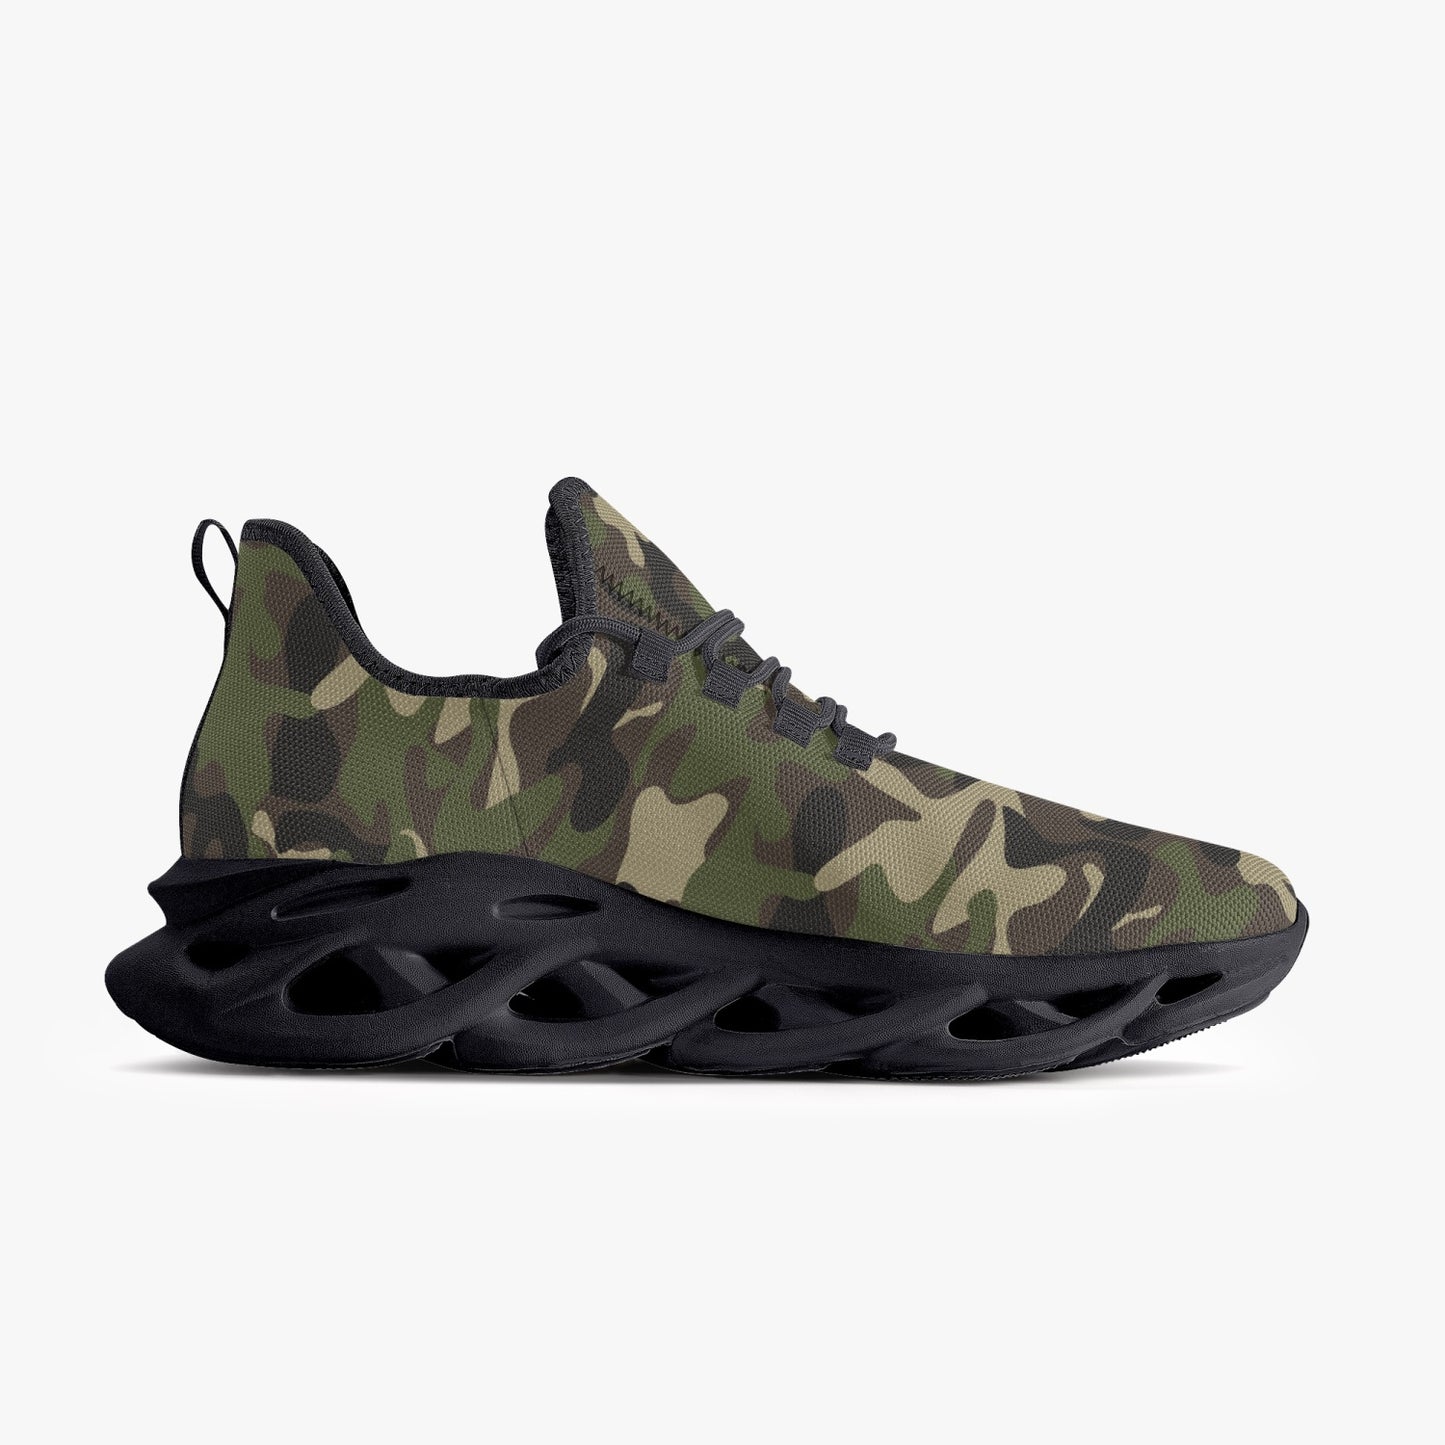 Camo Sneakers, Green Army Camouflage Bouncing Mesh Men Women Knit Running Athletic Sport Workout Breathable Lace Up Fitness Shoes Trainers